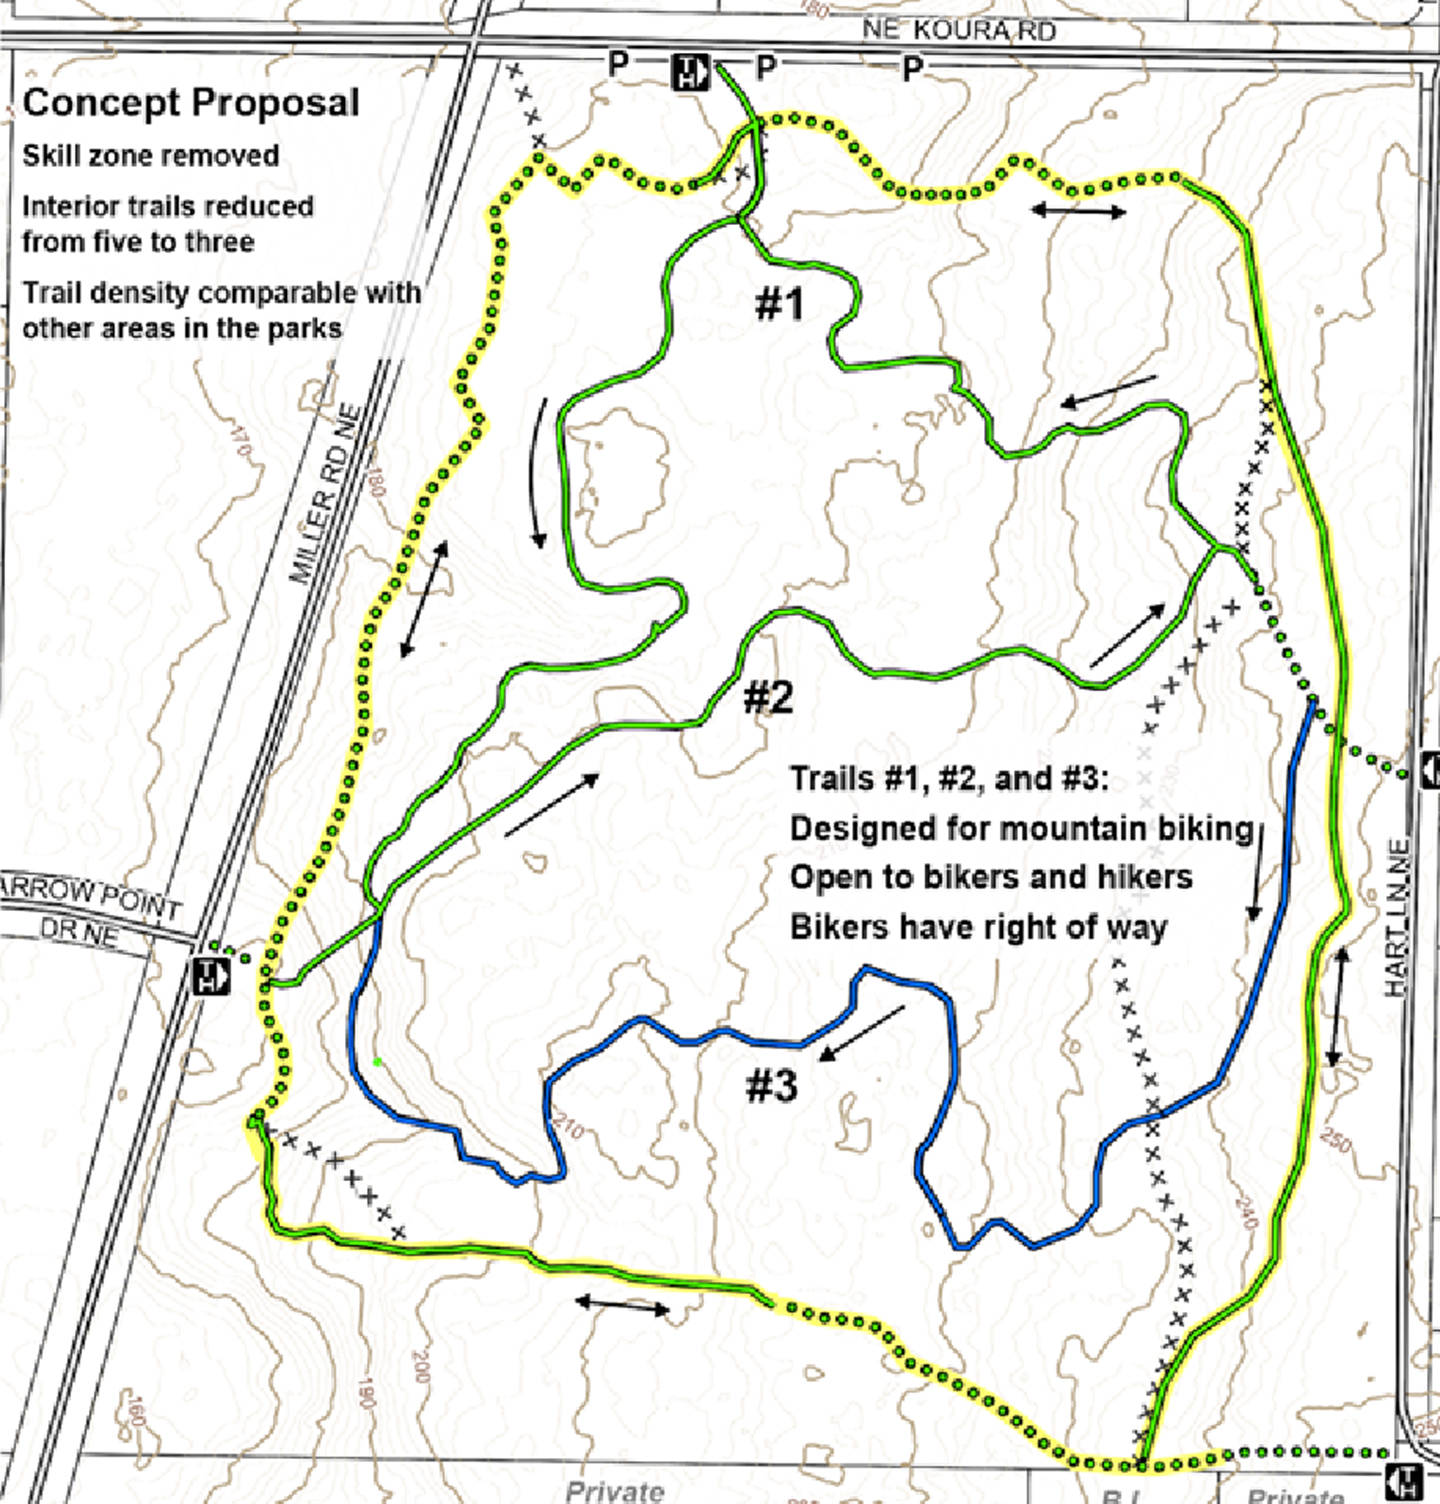 The mountain bike proposal has been reduced from five to three trails. Courtesy map